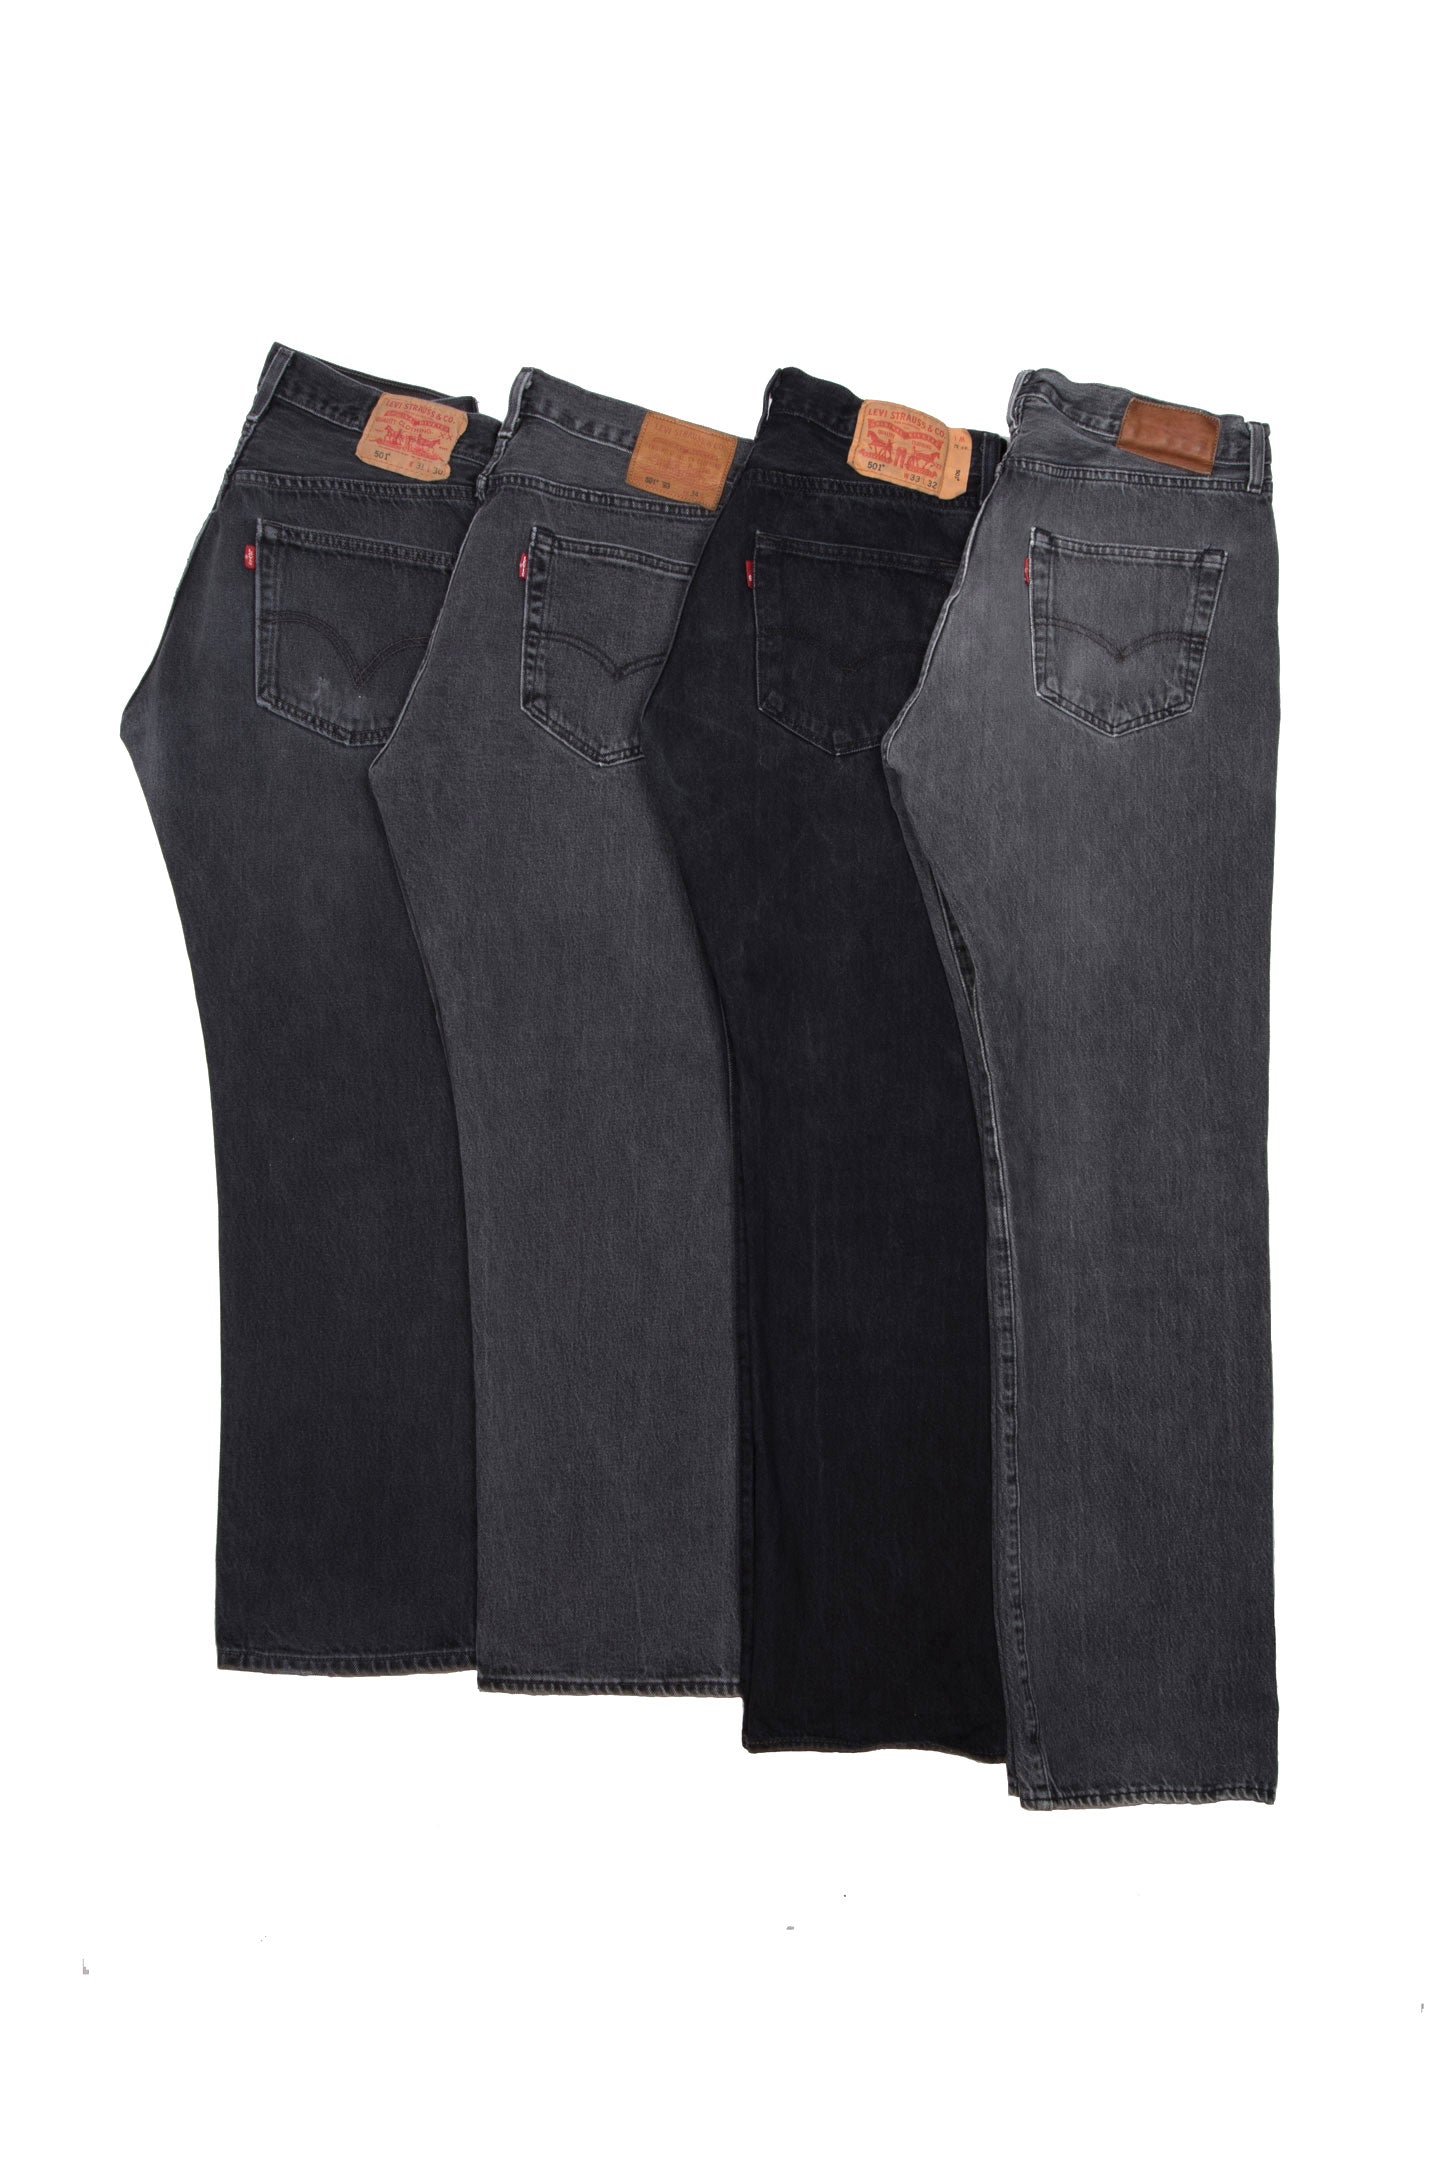 21ST CENTURY JEANS WASHED BLACK